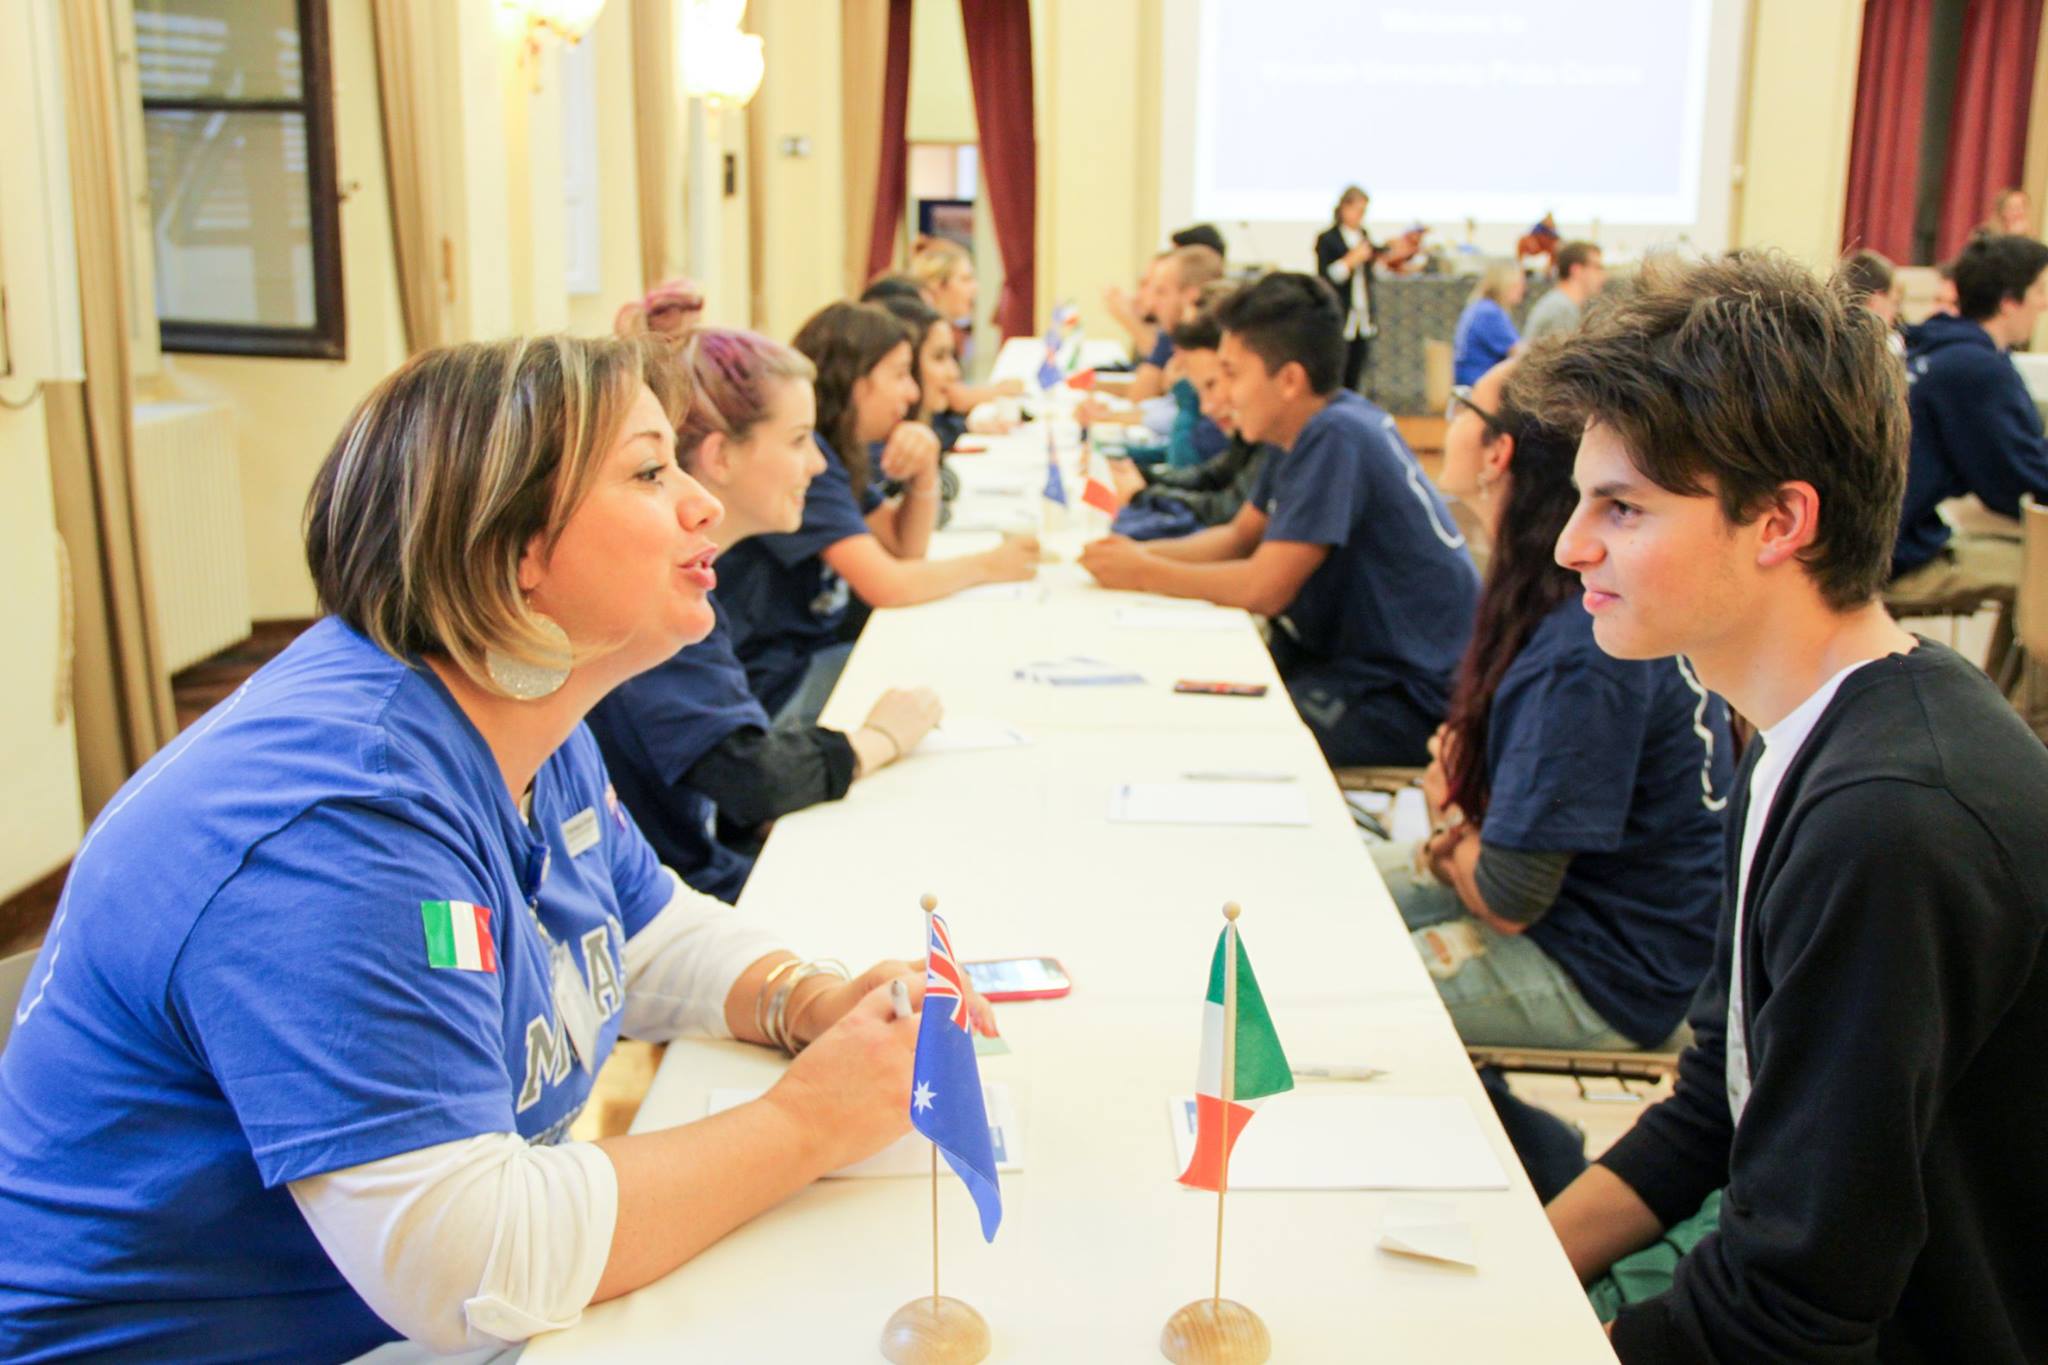 Monash University in Prato students participate in an English-Italian language exchange during their annual open day (Photo: Facebook page "Monash University Prato")